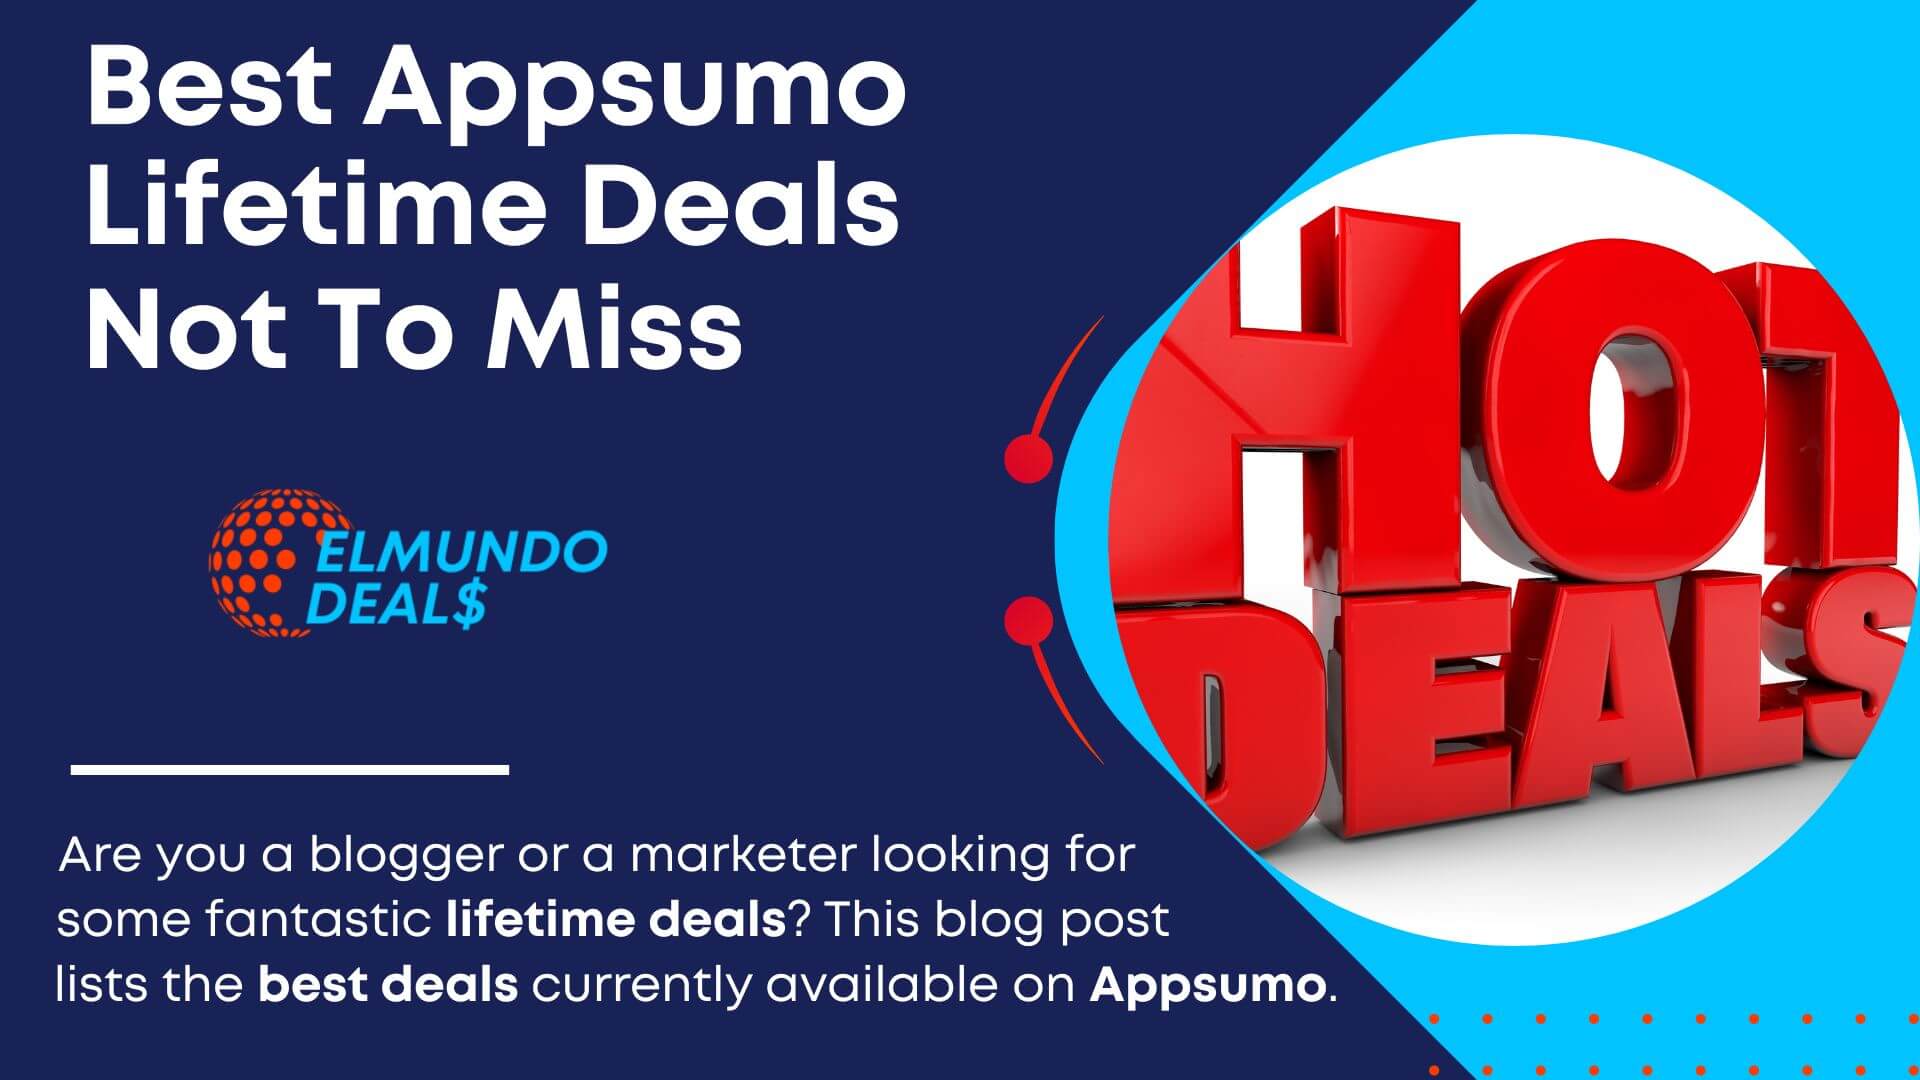 Best Appsumo Lifetime Deals Of The Month For Bloggers & Marketers